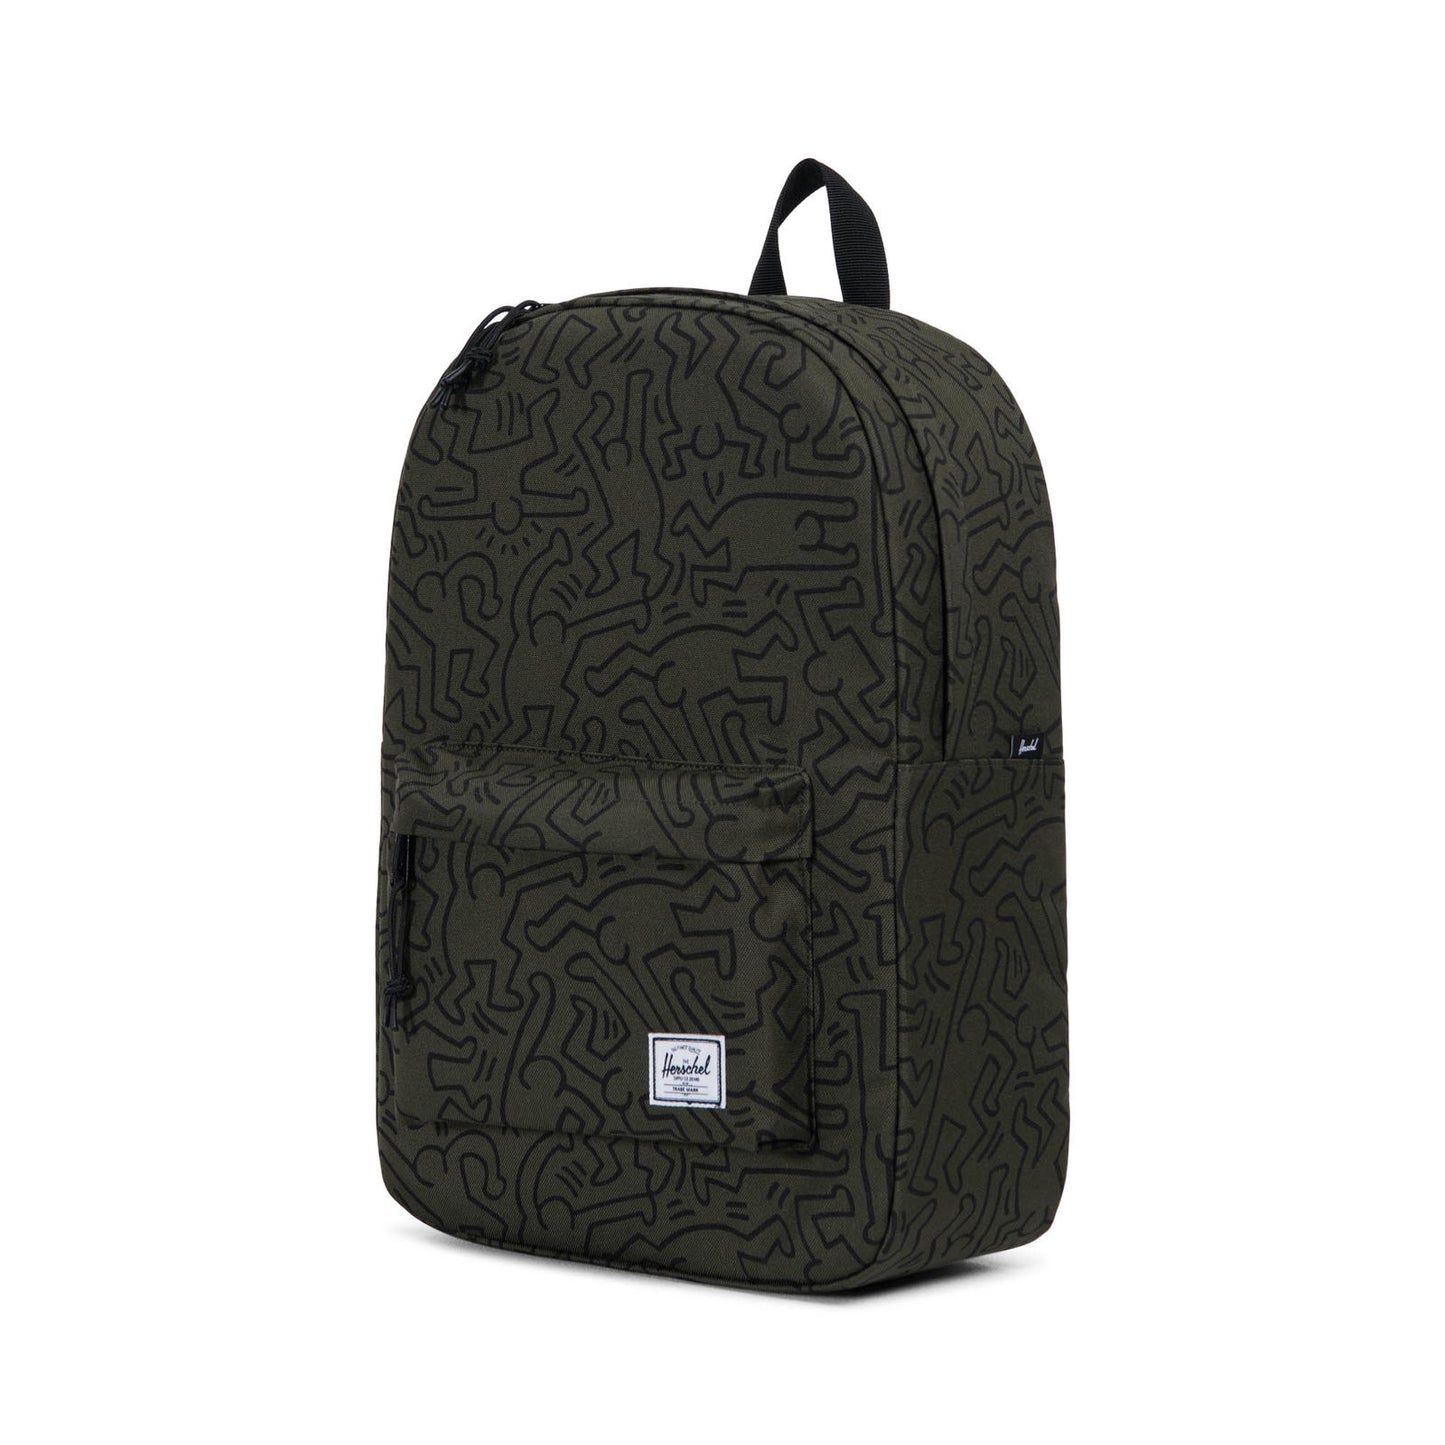 Herschel Supply Co. x Keith Haring - Winlaw Backpack, Forest Night